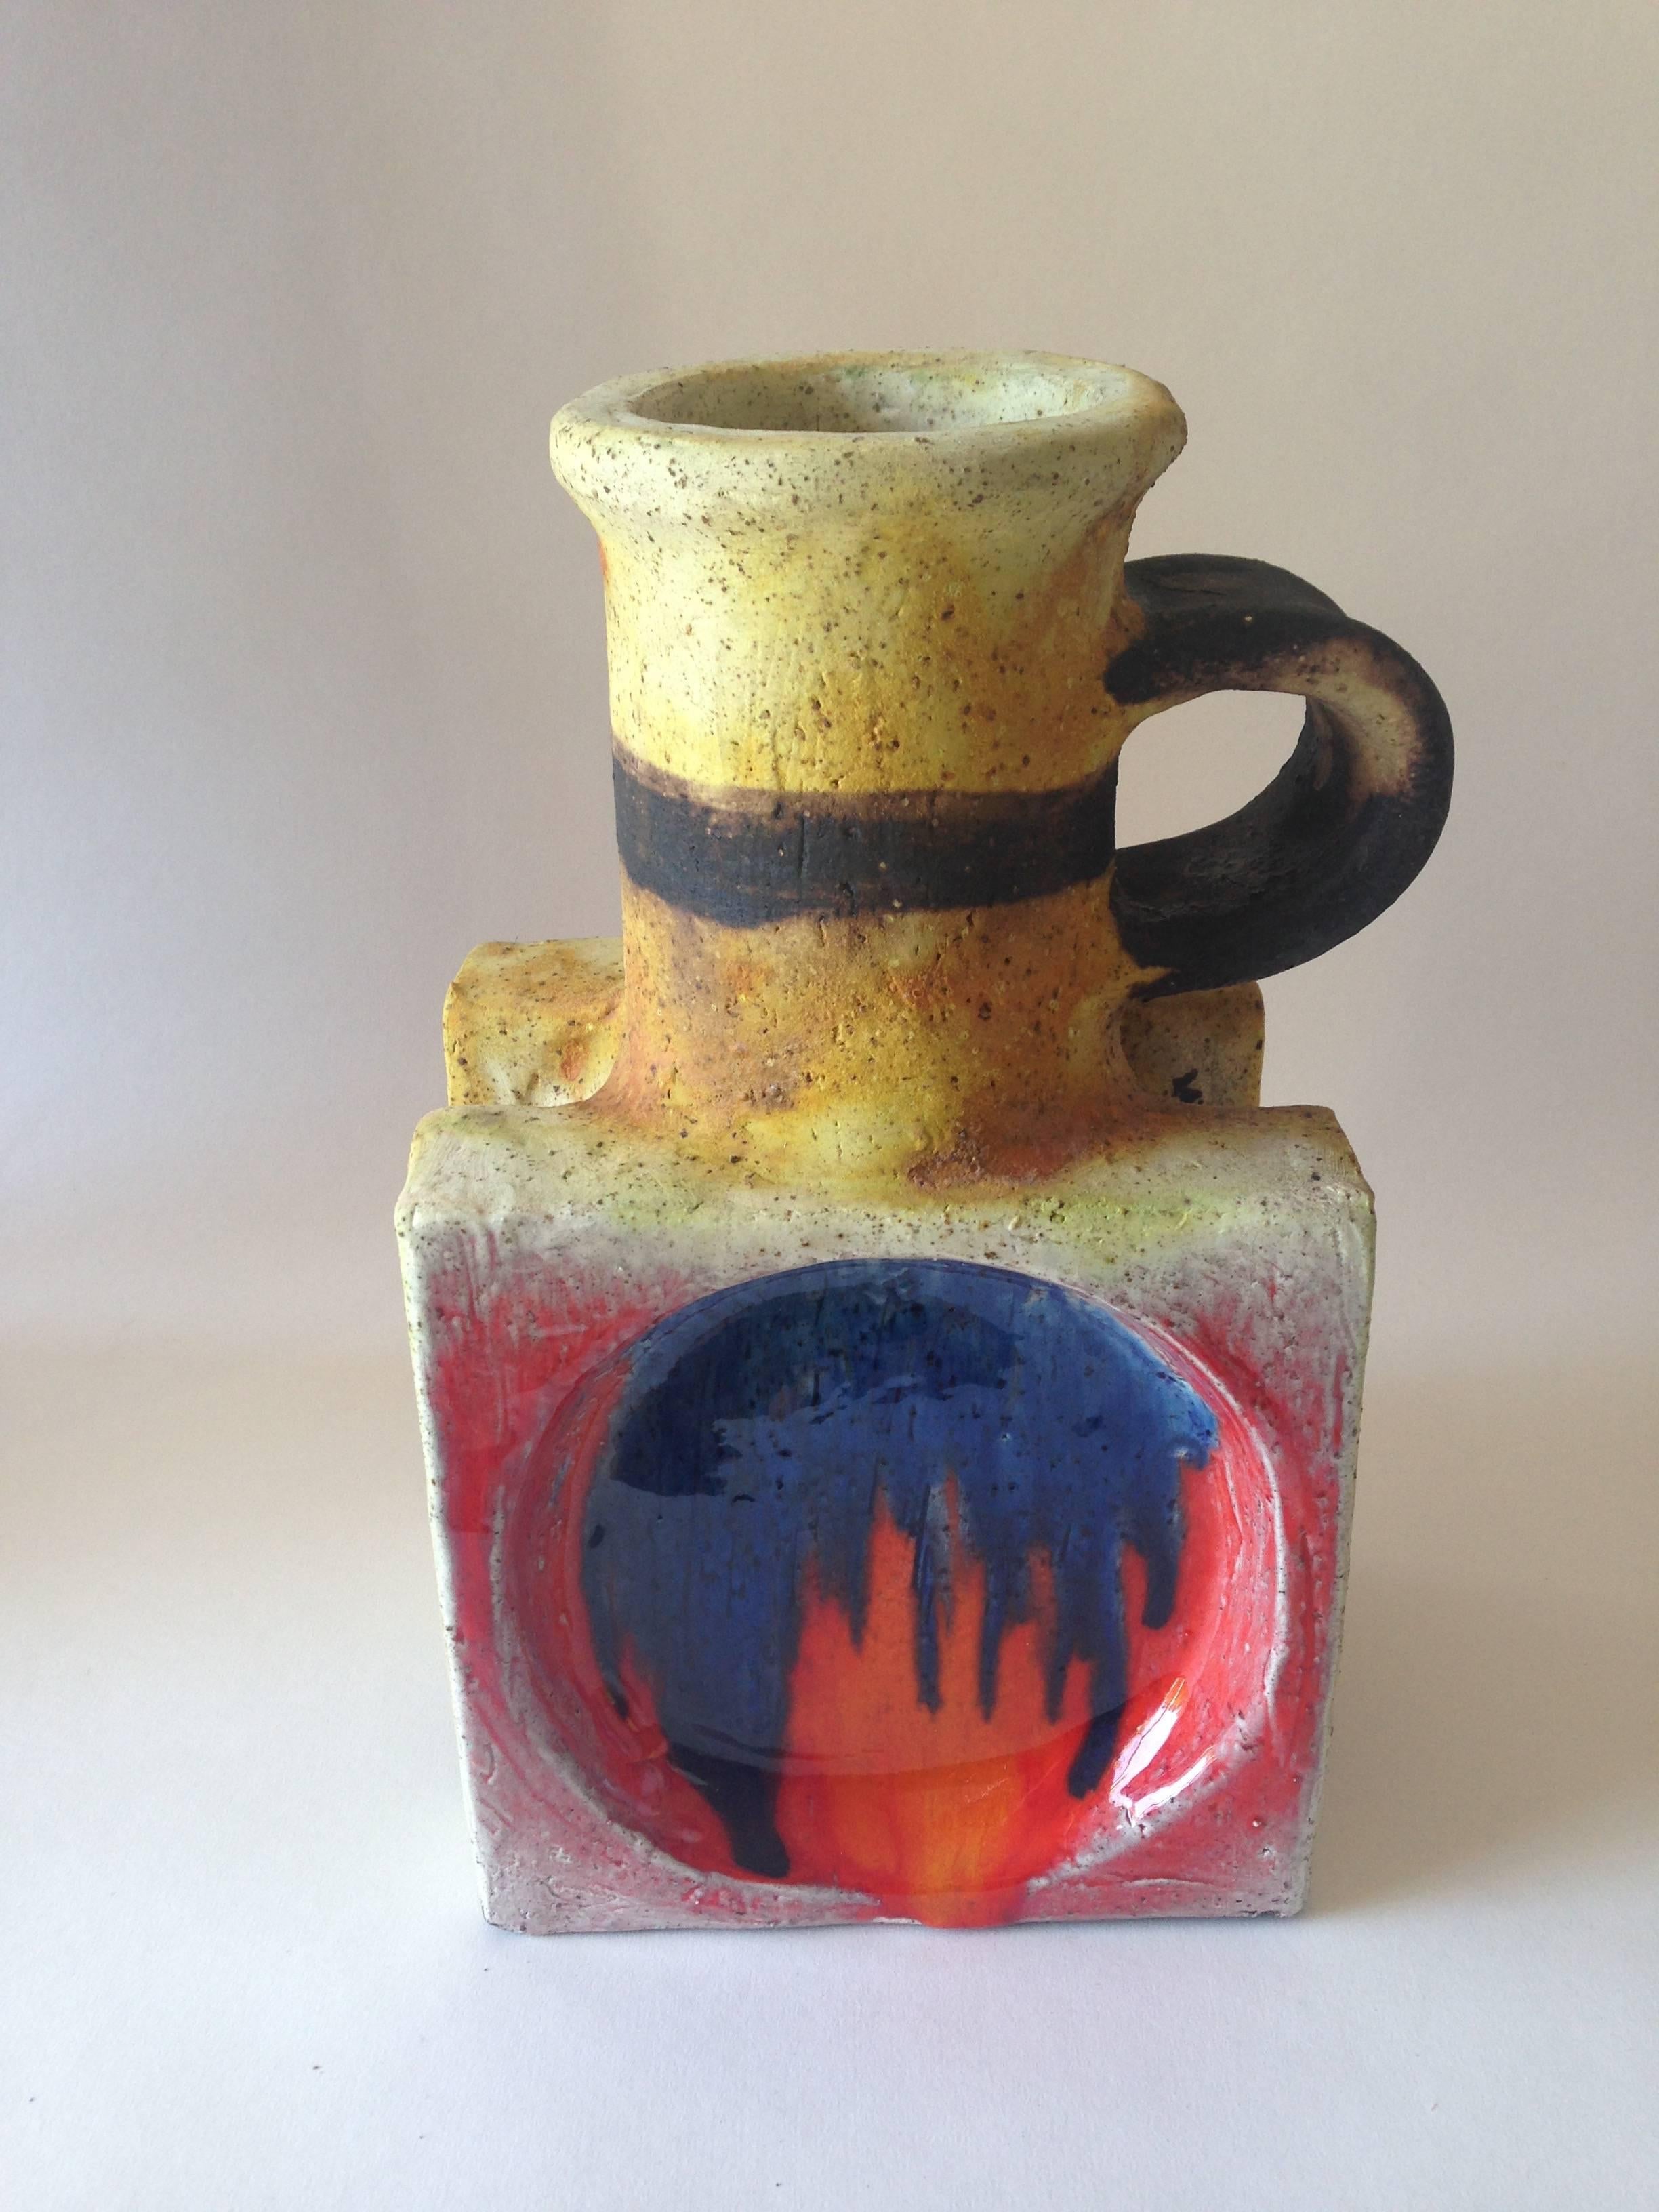 Colorful Italian modernist ceramic ewer created by Ivo De Santis for Gli Etruschi. Ewer measures 11" tall by 6.5" wide by 5" deep and is unsigned. In excellent vintage condition.